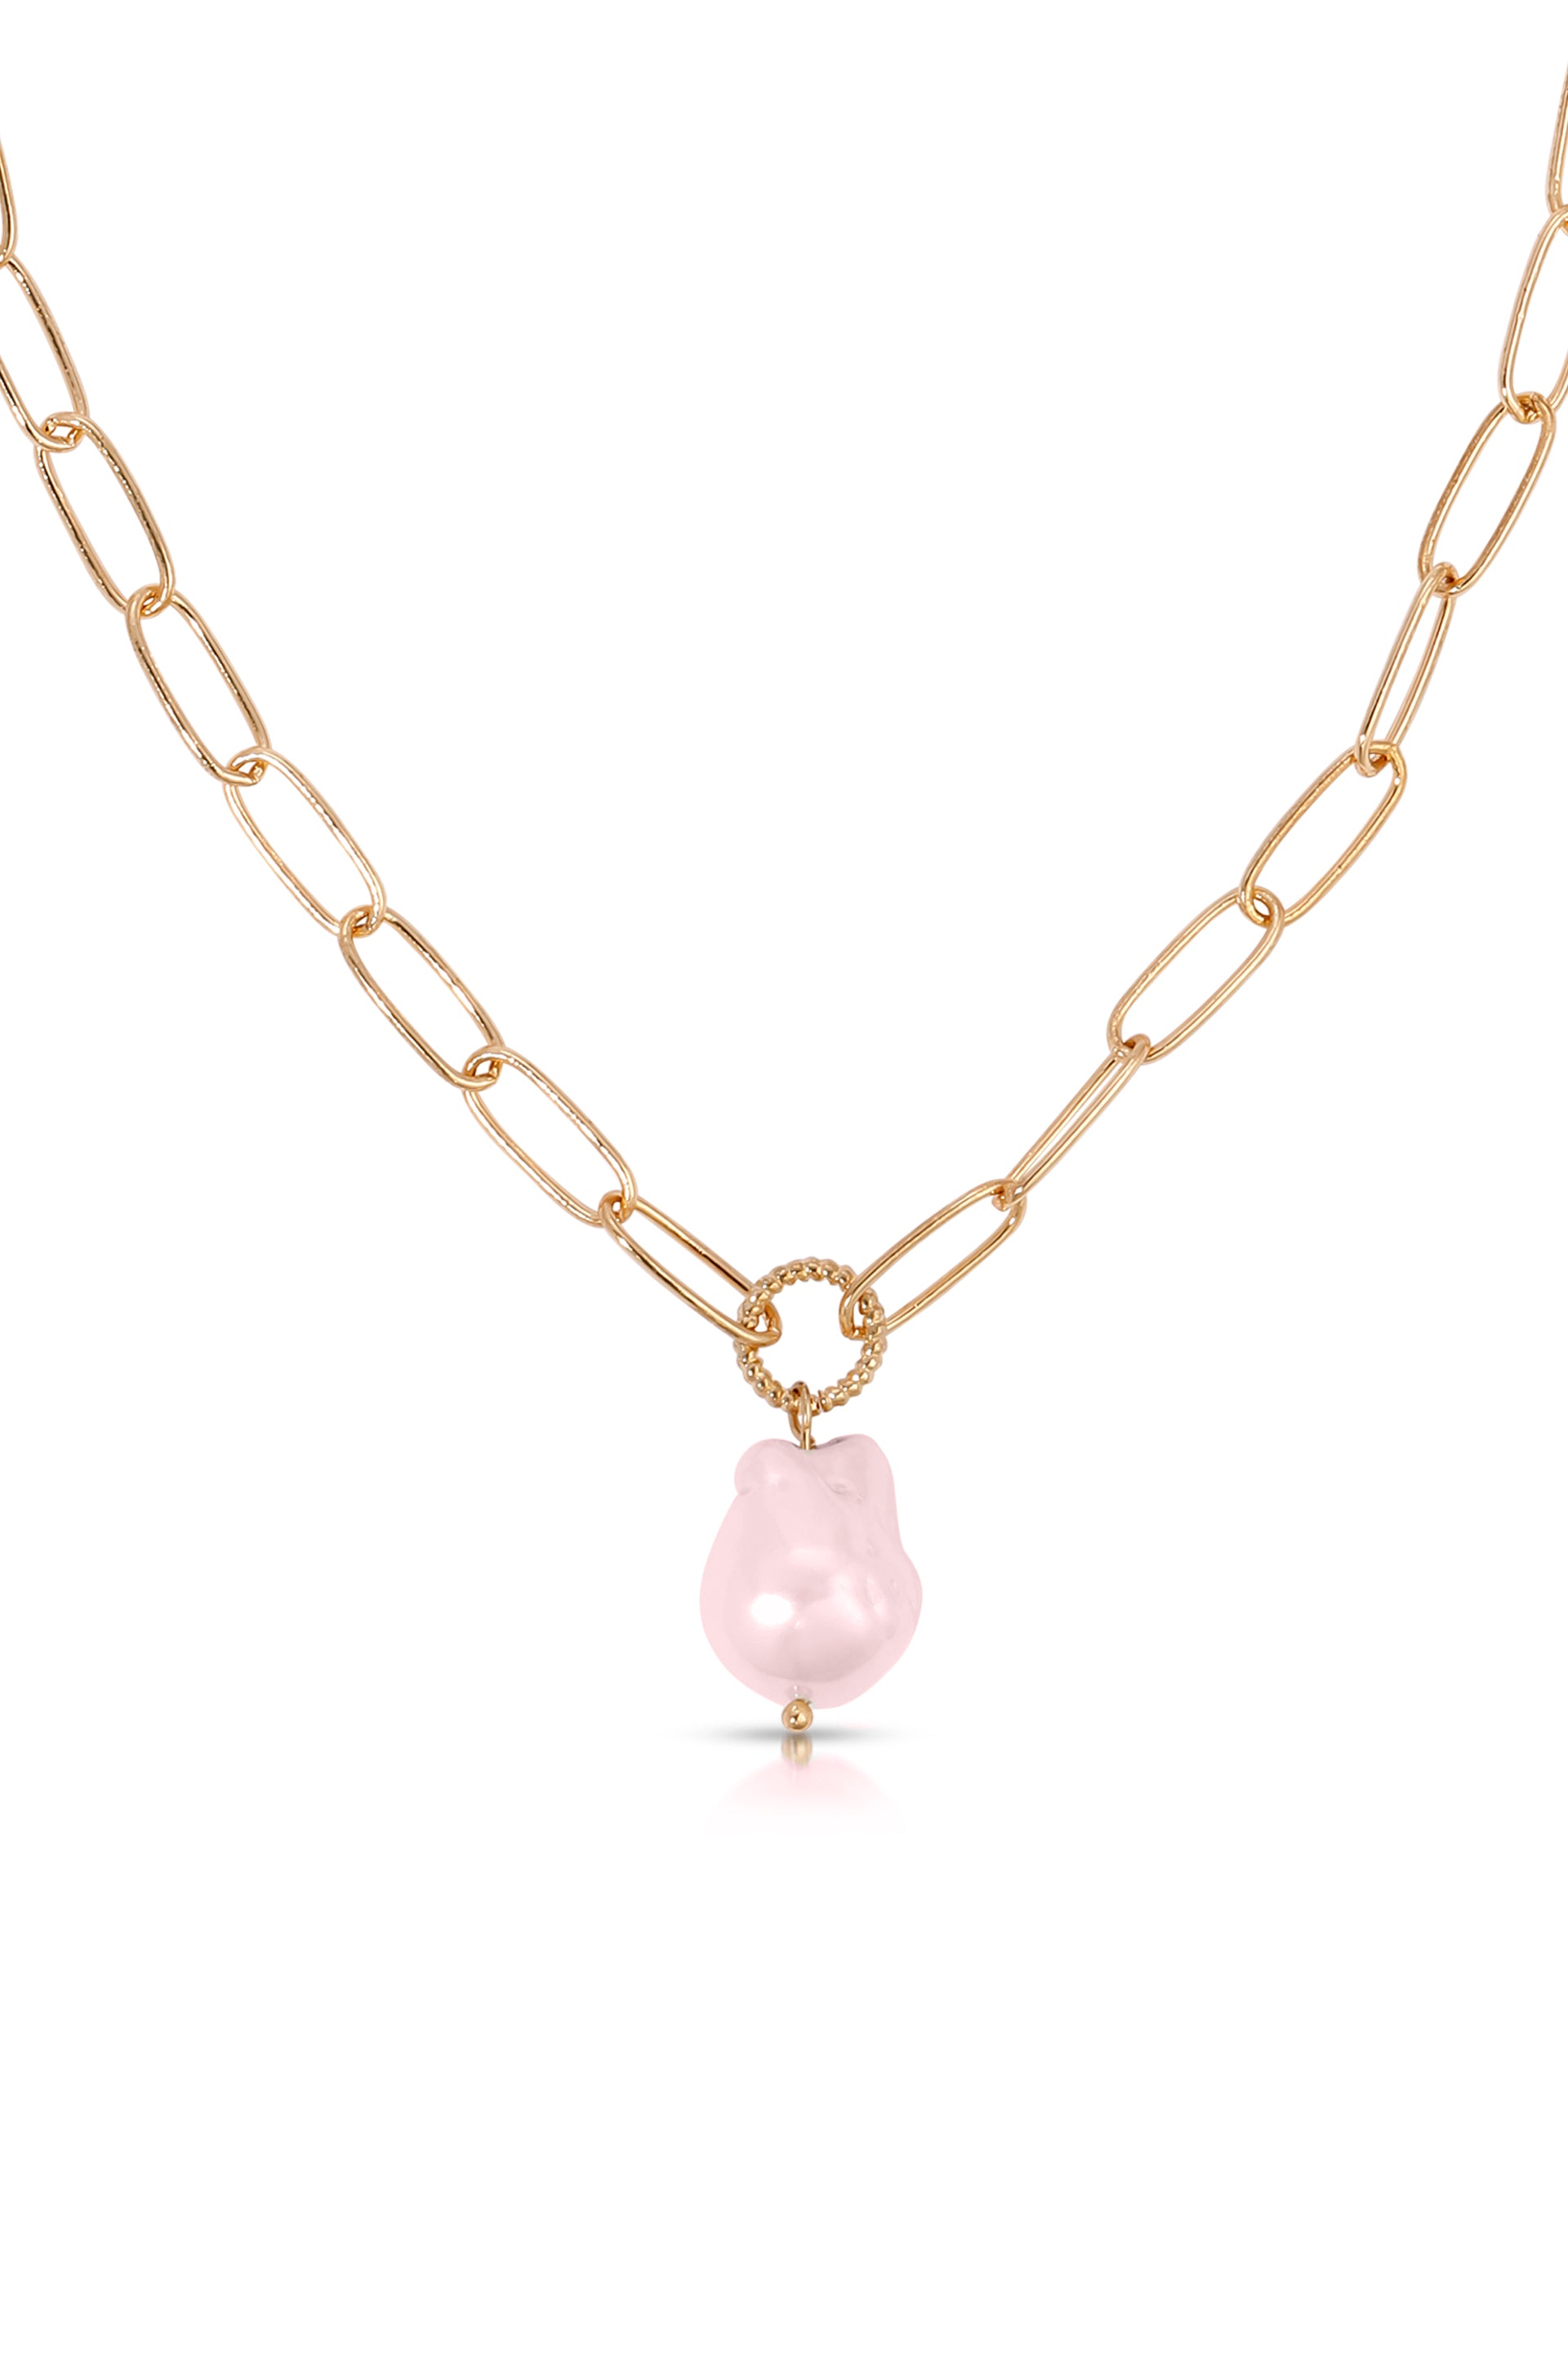 Single Pearl Open Links Chain Necklace in pink pearl close up